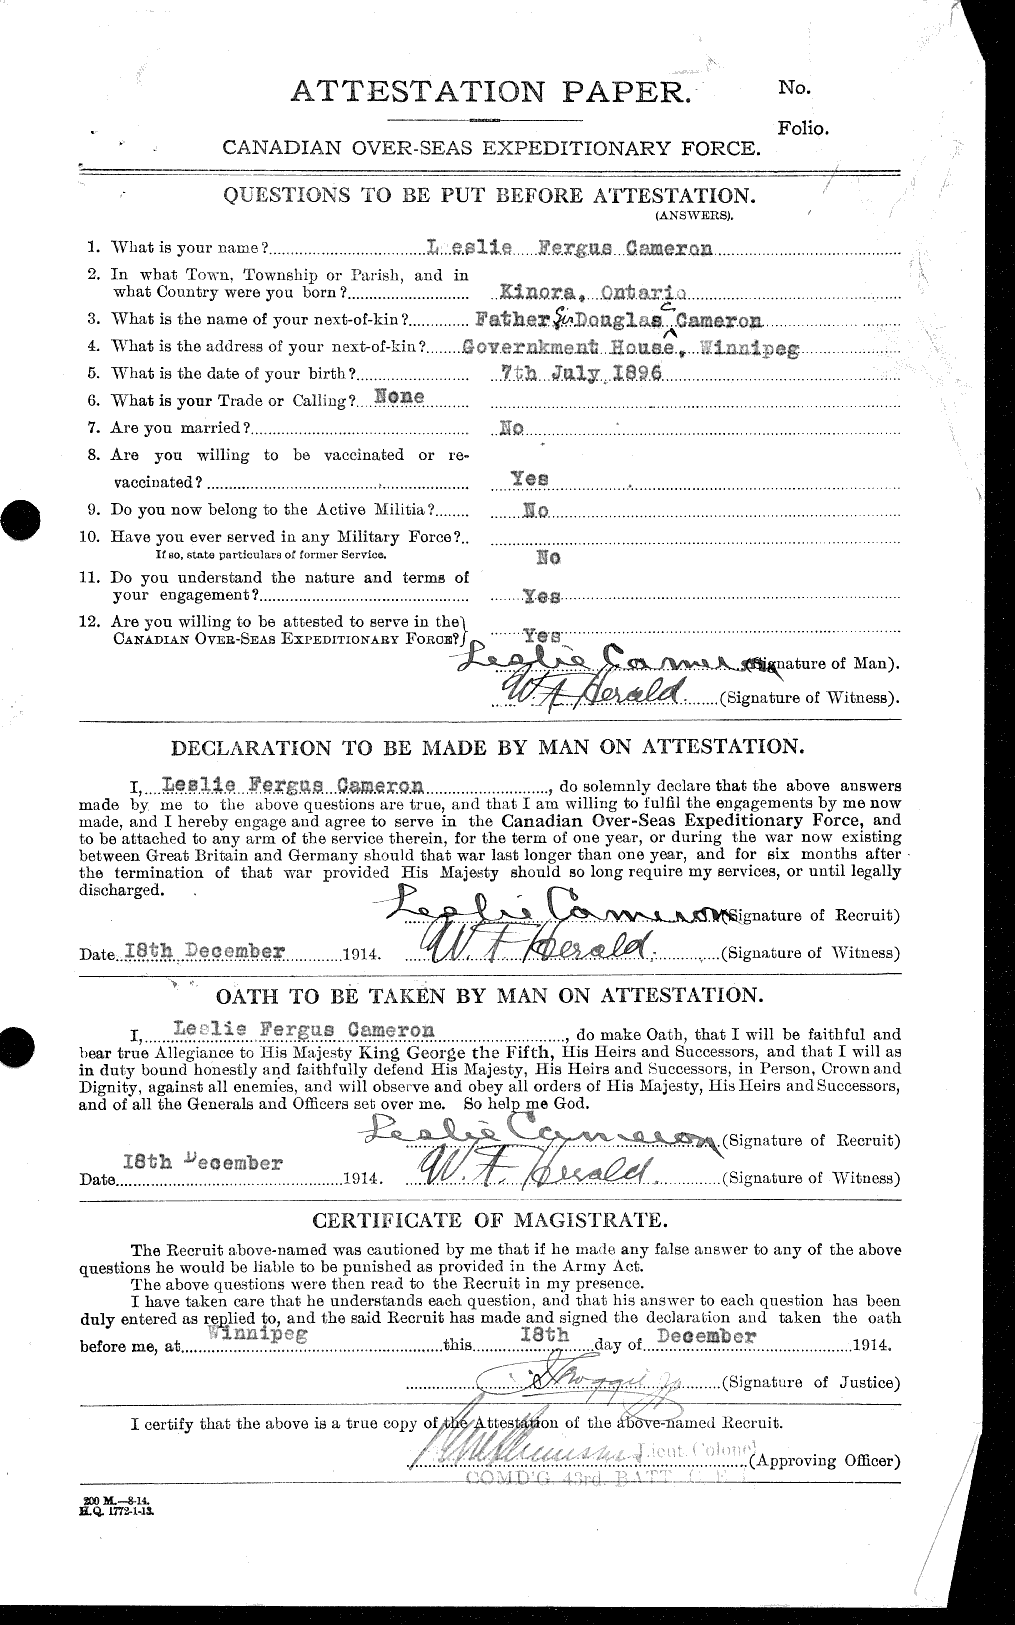 Personnel Records of the First World War - CEF 002394a